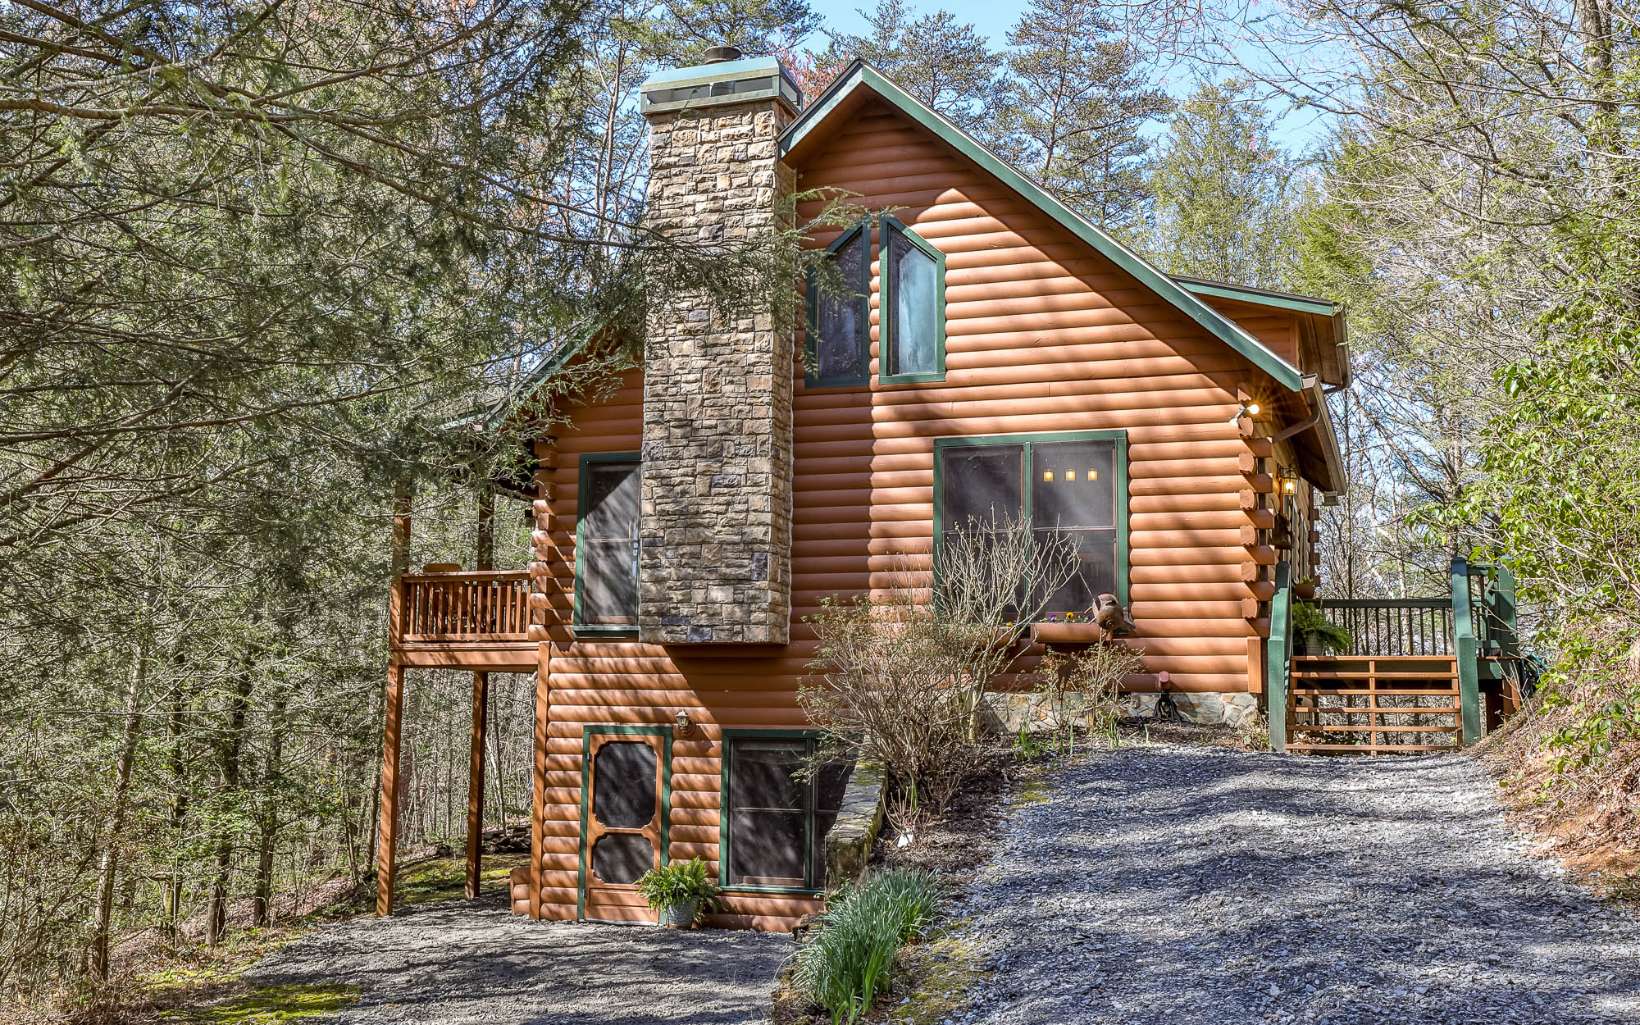 Back on market no fault of seller. This property is adjacent to the Rich Mountain Wilderness and Rock Creek, creating a private sanctuary on 1.65 acres. Perfect as a vacation home or primary residence. Sit outside and listen to the sounds of Rock Creek as it soothes your cares away. This is a custom built all wood log cabin with 3 bedrooms and 3 baths. Spend cozy days and nights next to the fireplace in a living room that has soaring ceilings and beautiful extra wide pine floor planking. Exposed beams grace the entire main floor. Antique mantel from 1800's. The kitchen has been updated with new granite countertops and and light fixtures. The primary bedroom is on the main floor and has a full bath. There's a extra large bedroom with full bath in the upstairs loft. The finished terrace level has a bedroom & bath, playroom or additional living/sleeping space. Enjoy the outdoors in comfort from the deck or porch. This is the perfect location between Ellijay and Blue Ridge. There is no HOA.